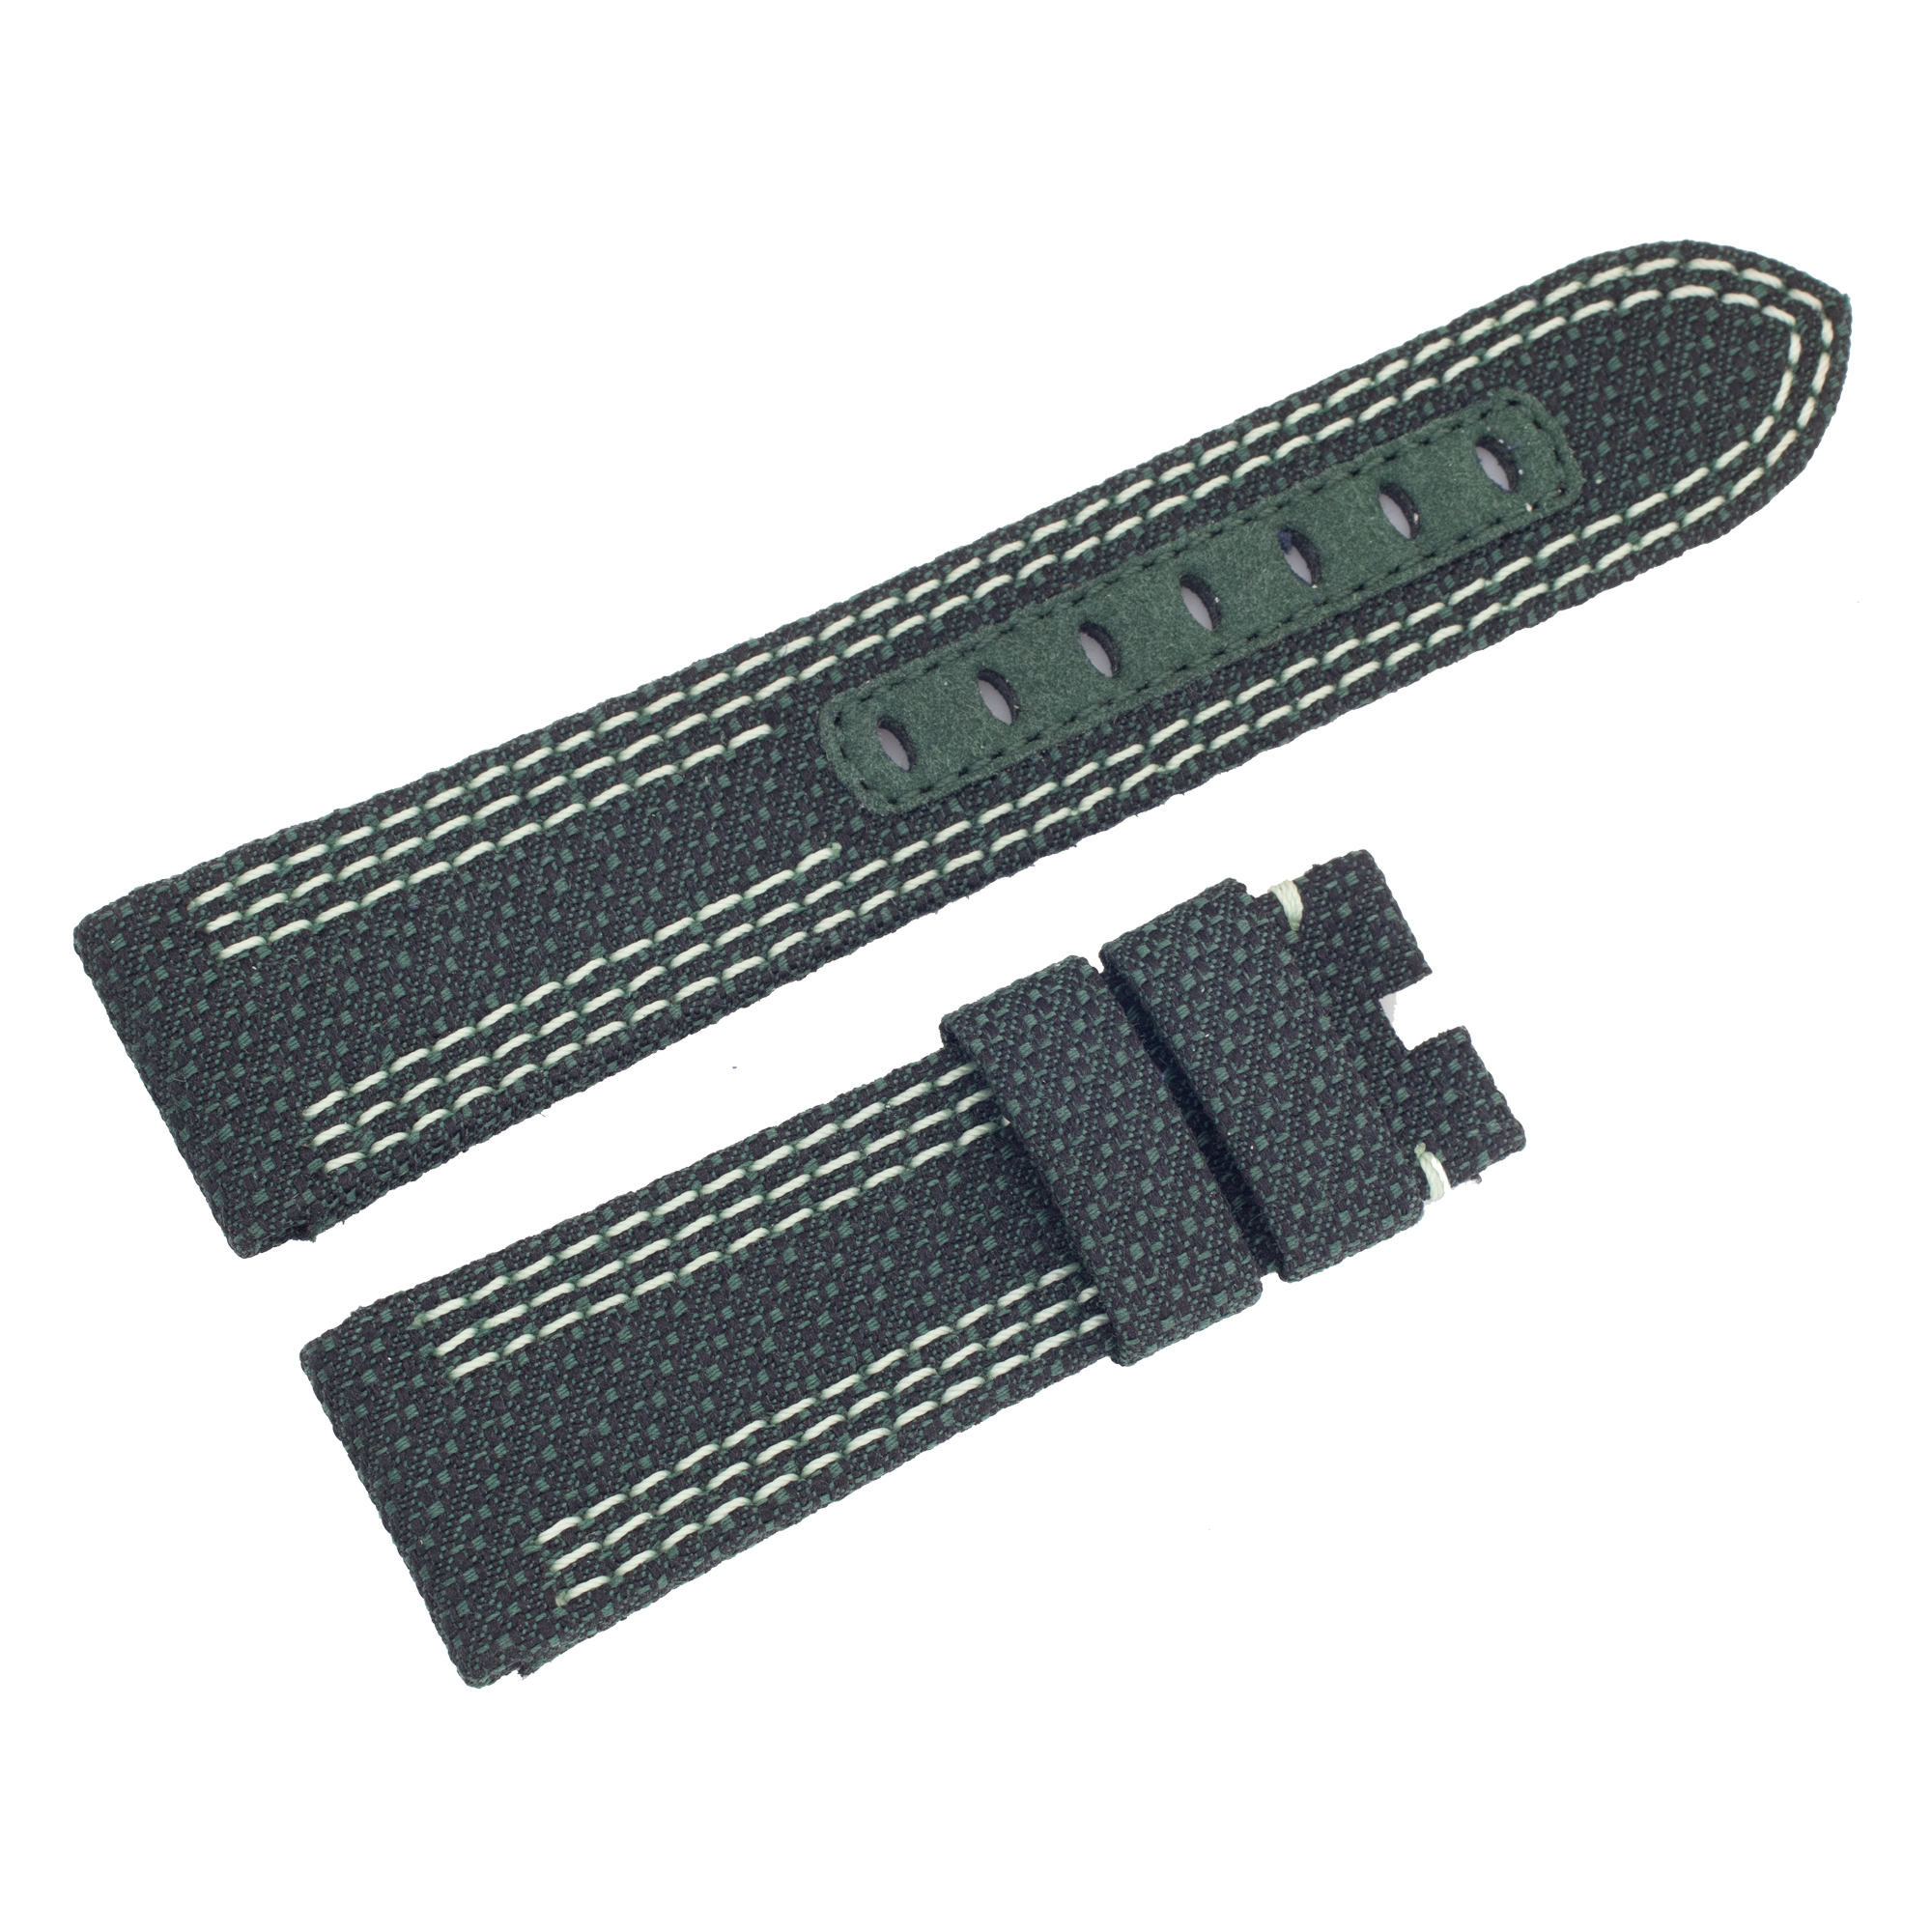 Panerai fabric strap in forrest green with white stitching (24mm x 22mm)